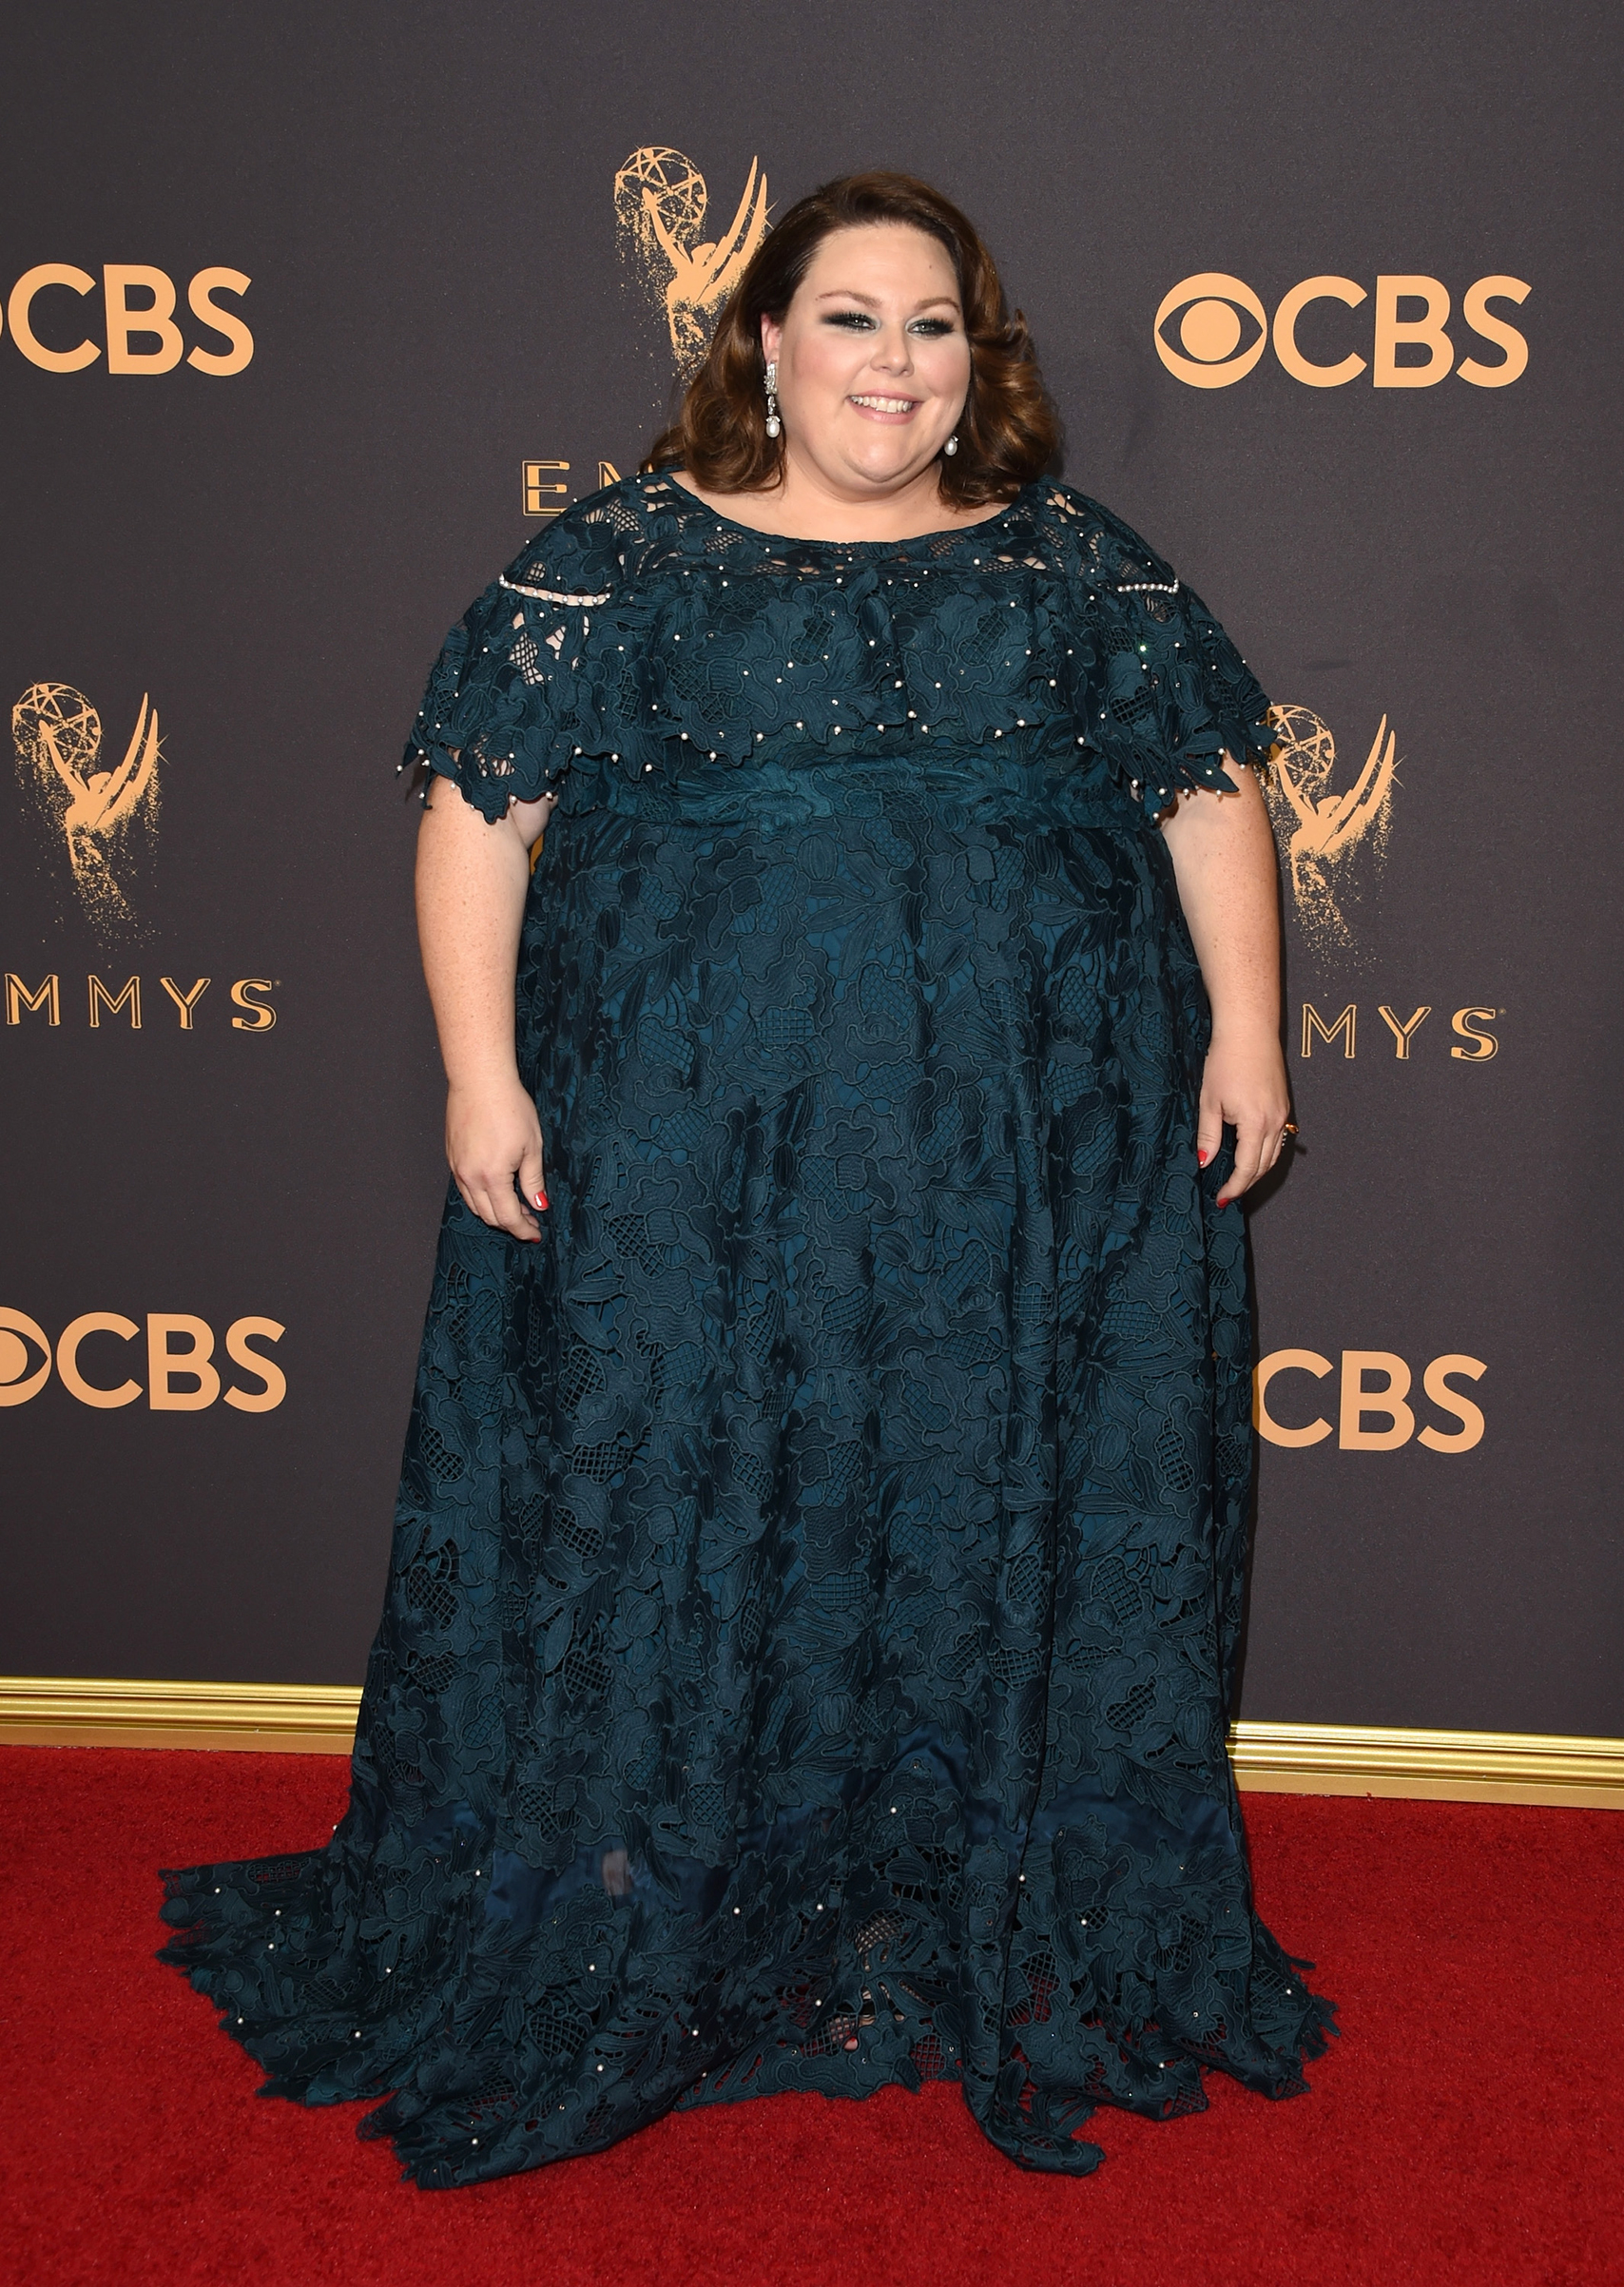 Actor Chrissy Metz attends the 69th Annual Primetime Emmy Awards at Microsoft Theater on September 17, 2017 in Los Angeles, California.